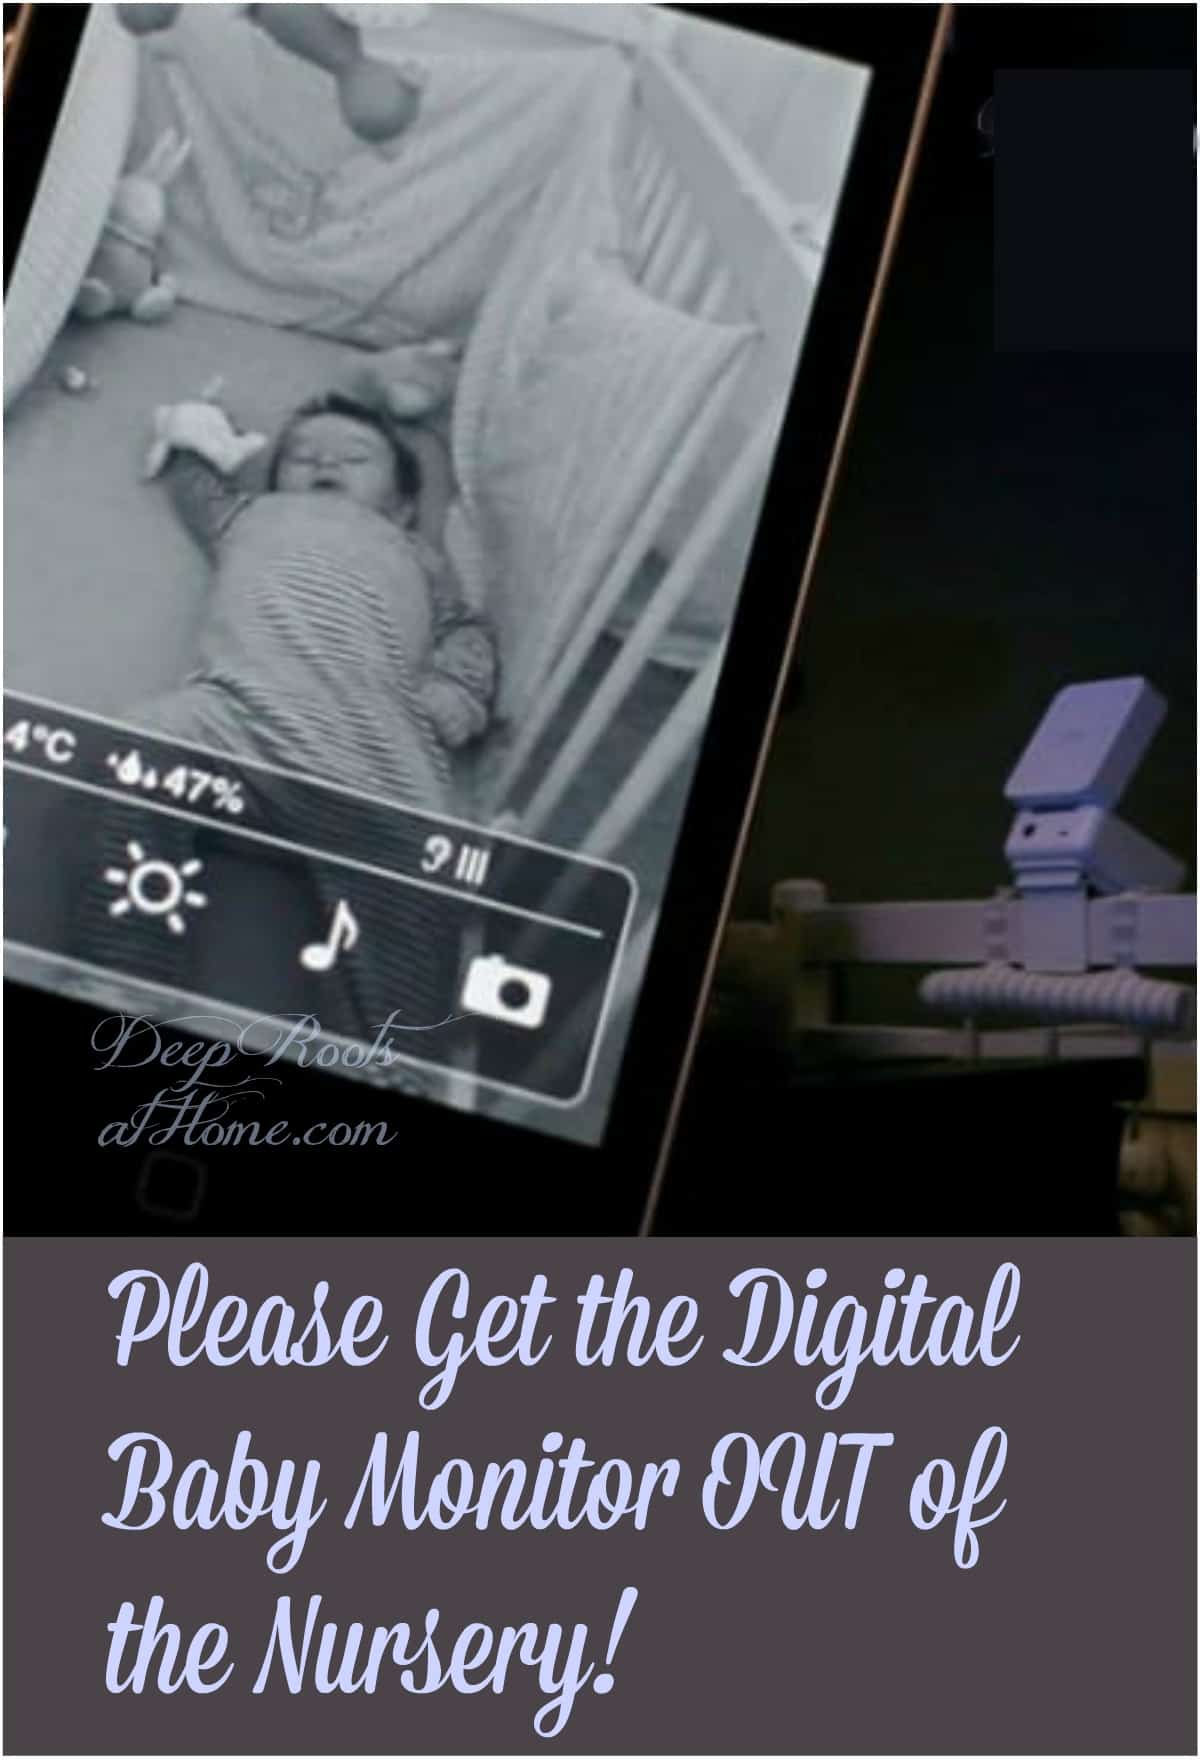 Get the Digital Baby Monitor OUT of the Nursery! An image of a sleeping baby in a dark room with blue light as seen on the digital baby monitor